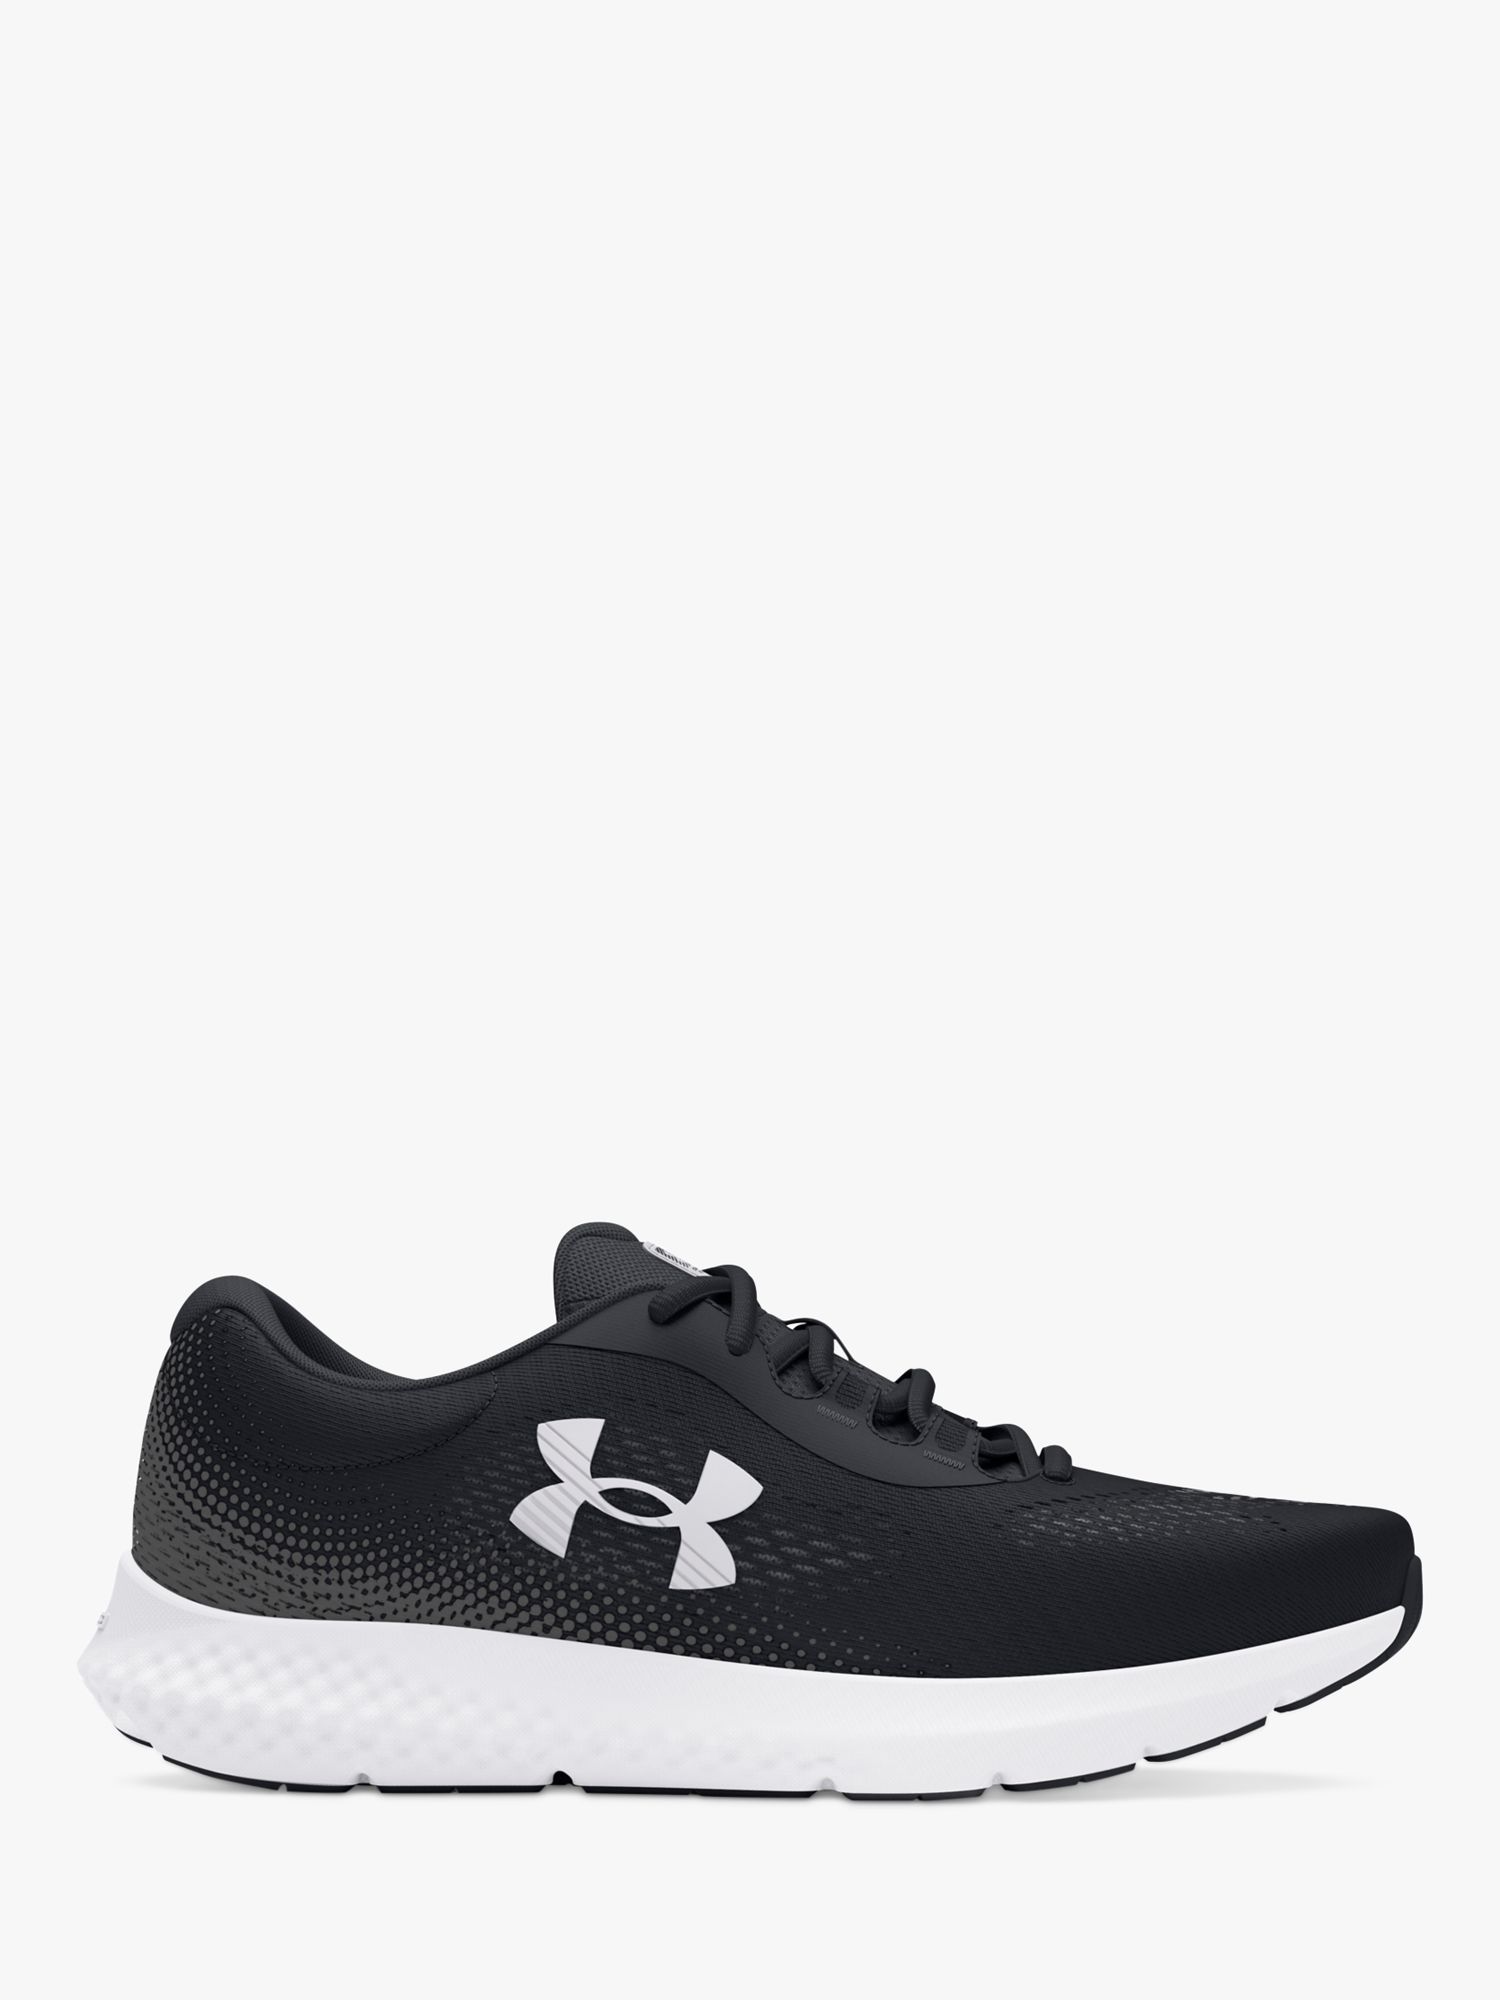 Under Armour Rogue 4 Women's Running Shoes, Black/White at John Lewis &  Partners